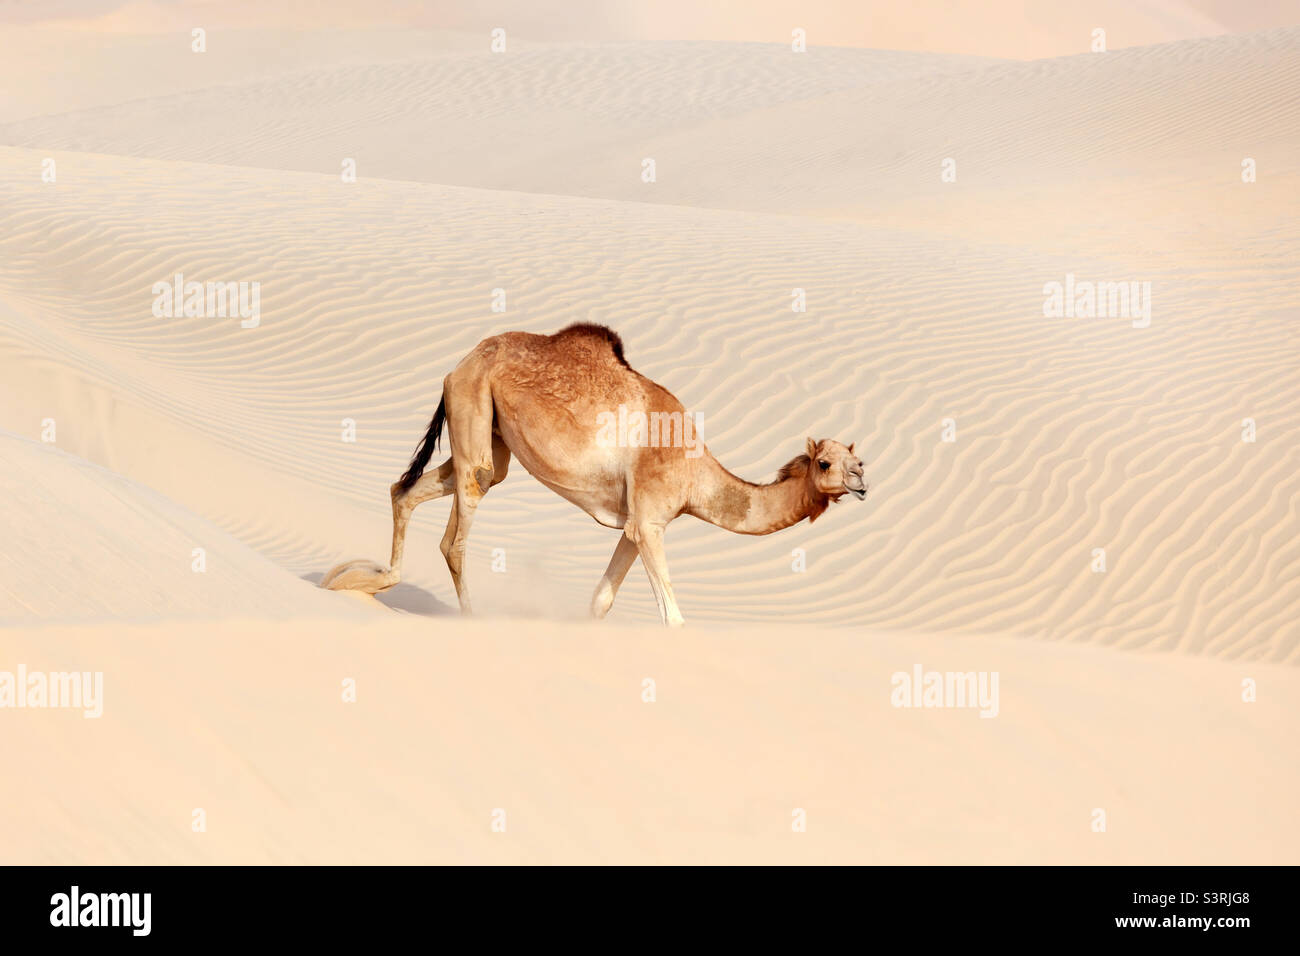 Middle Eastern camel in the sand dunes in the desert in Abu Dhabi Stock Photo